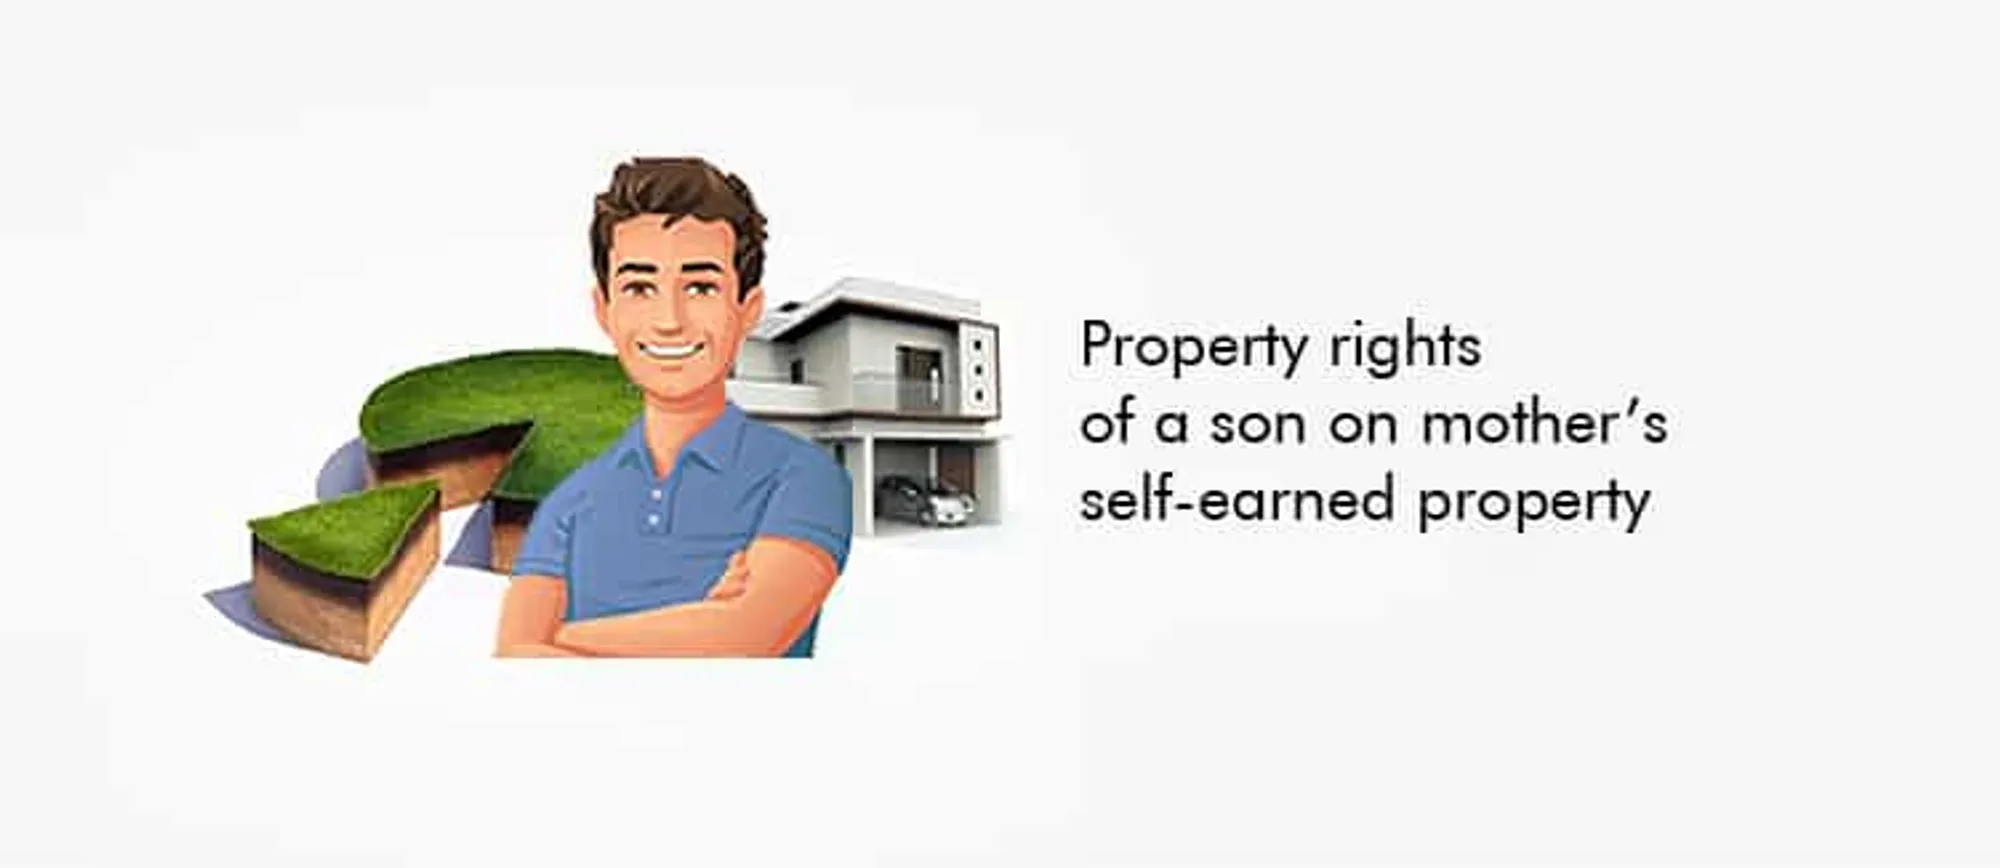 Property rights of a son on mother’s self-earned property – Issues and the Law